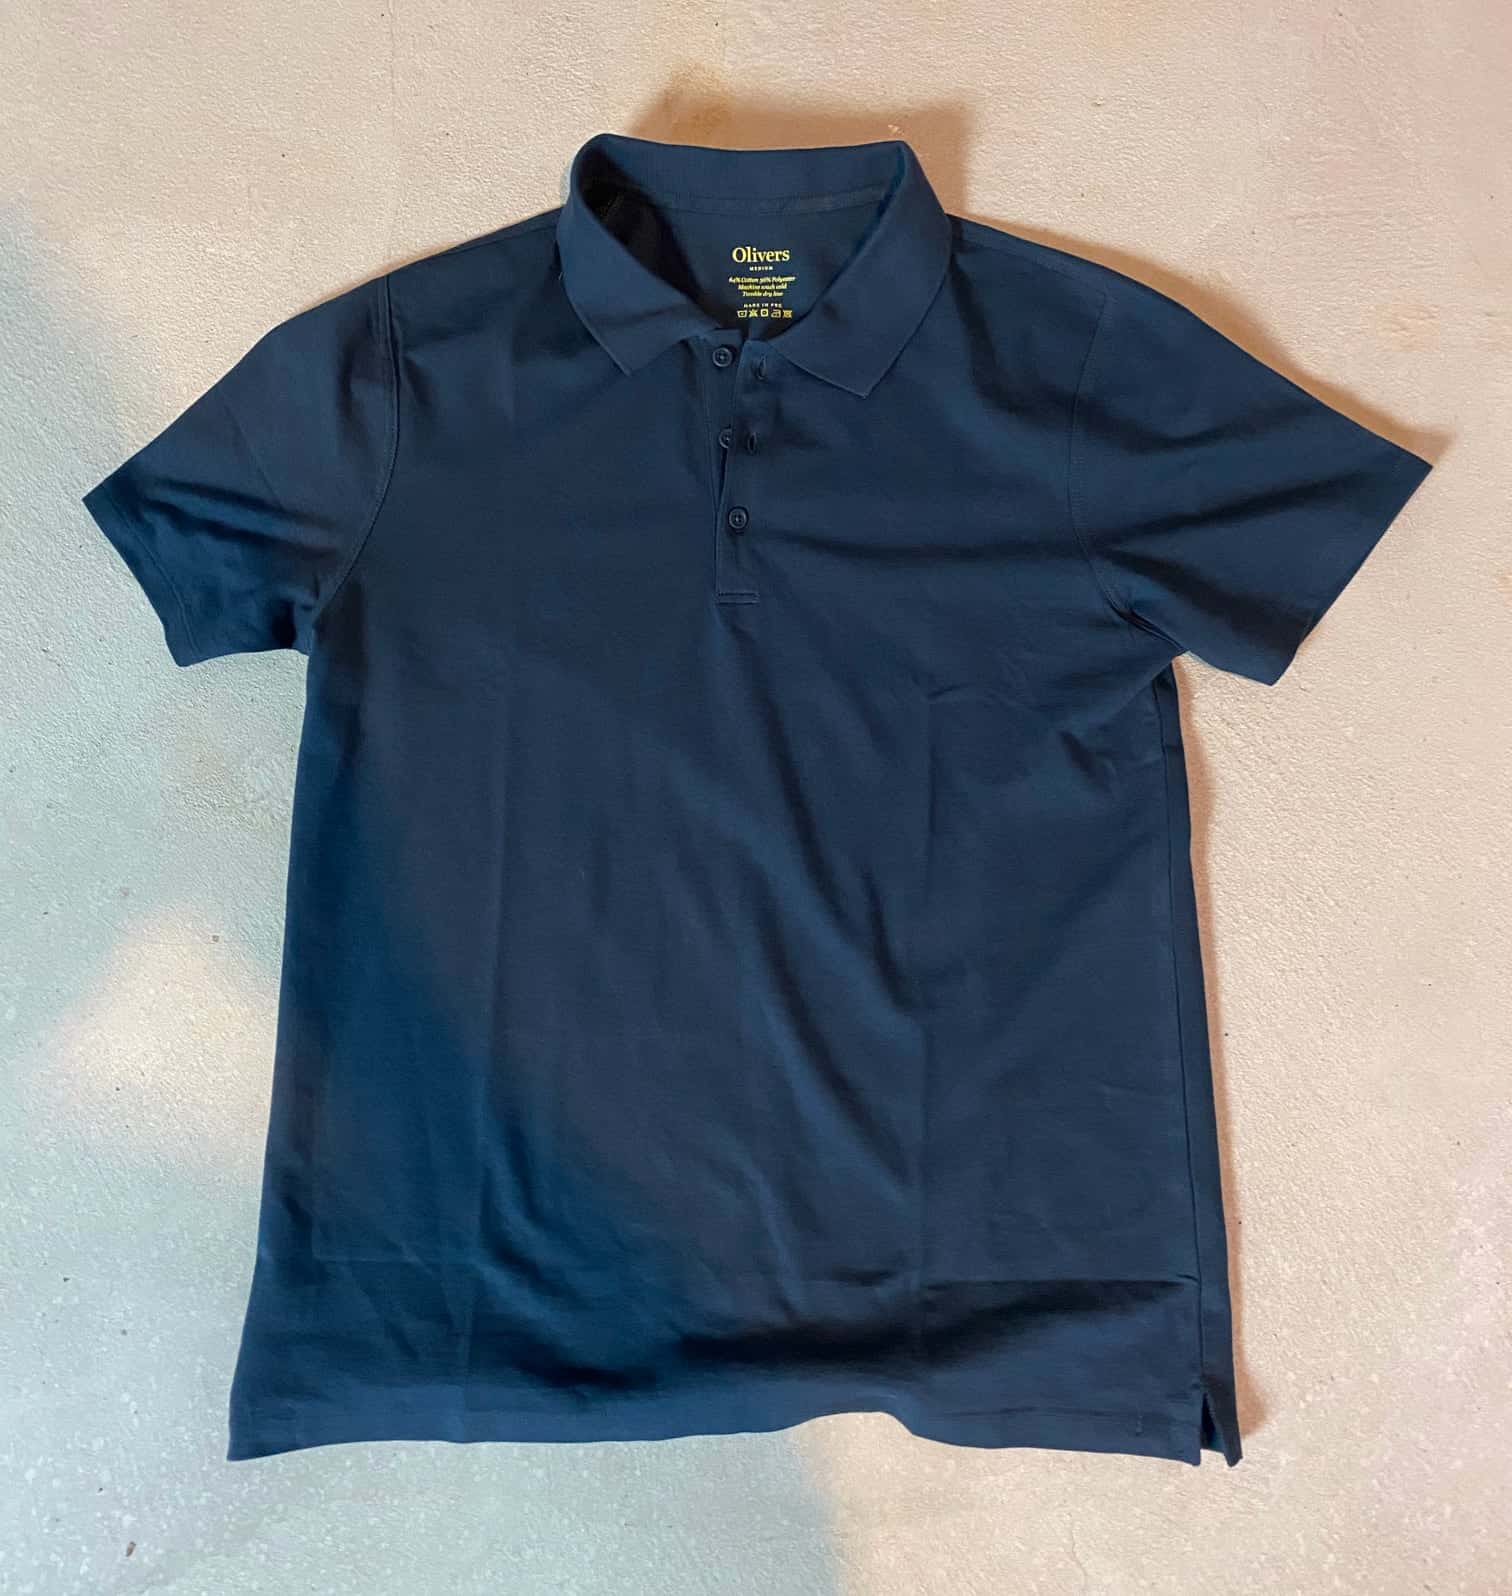 Olivers District Polo Review: Does The World Need Another Polo Shirt?